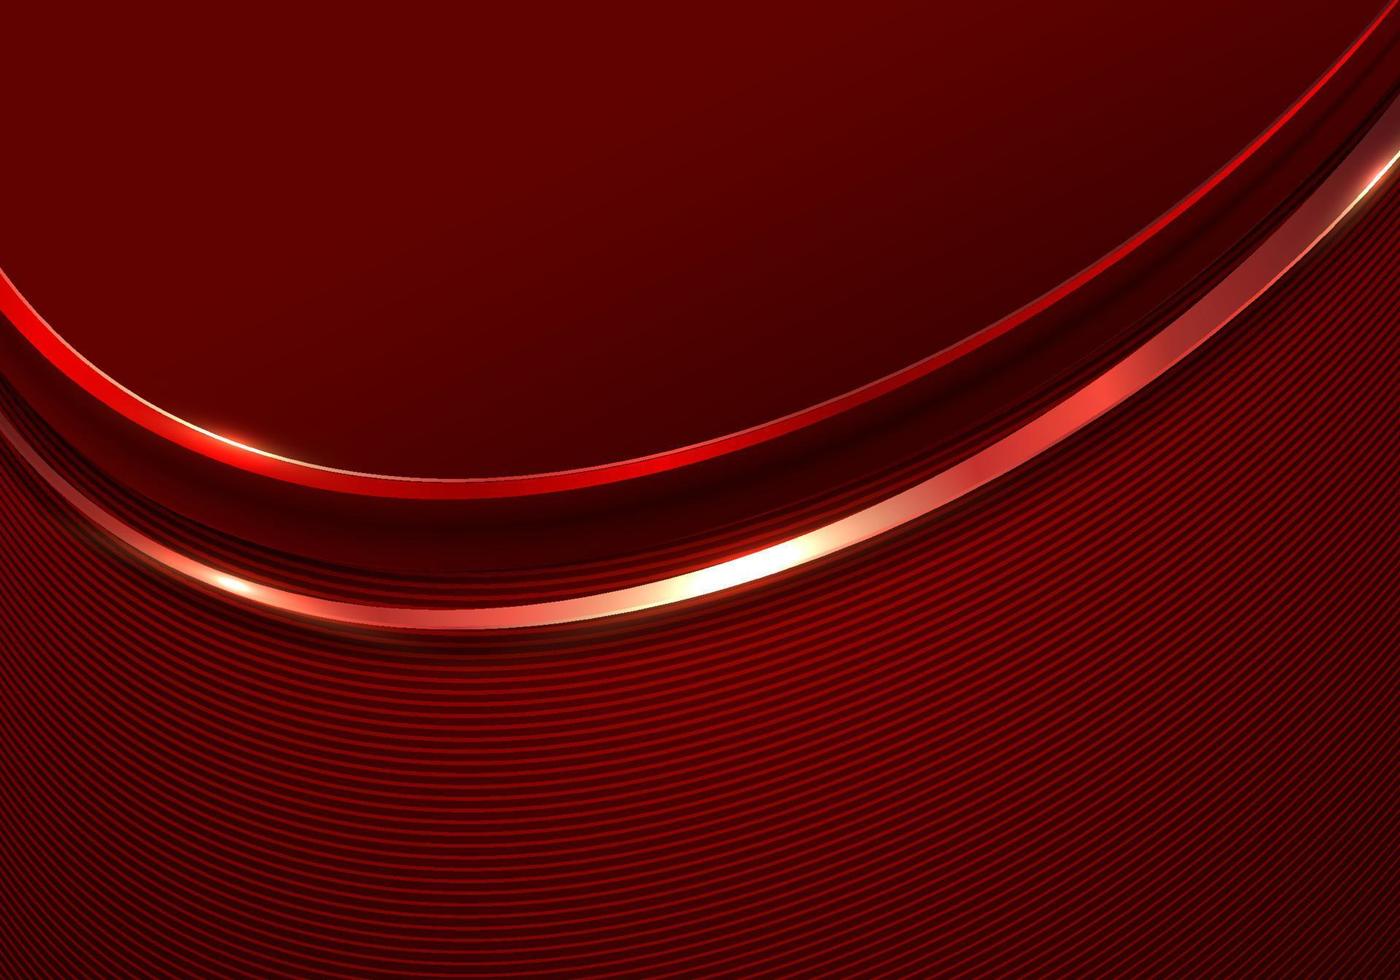 Abstract luxury 3D shiny red curved shapes with lines elements paper cut style on red background vector